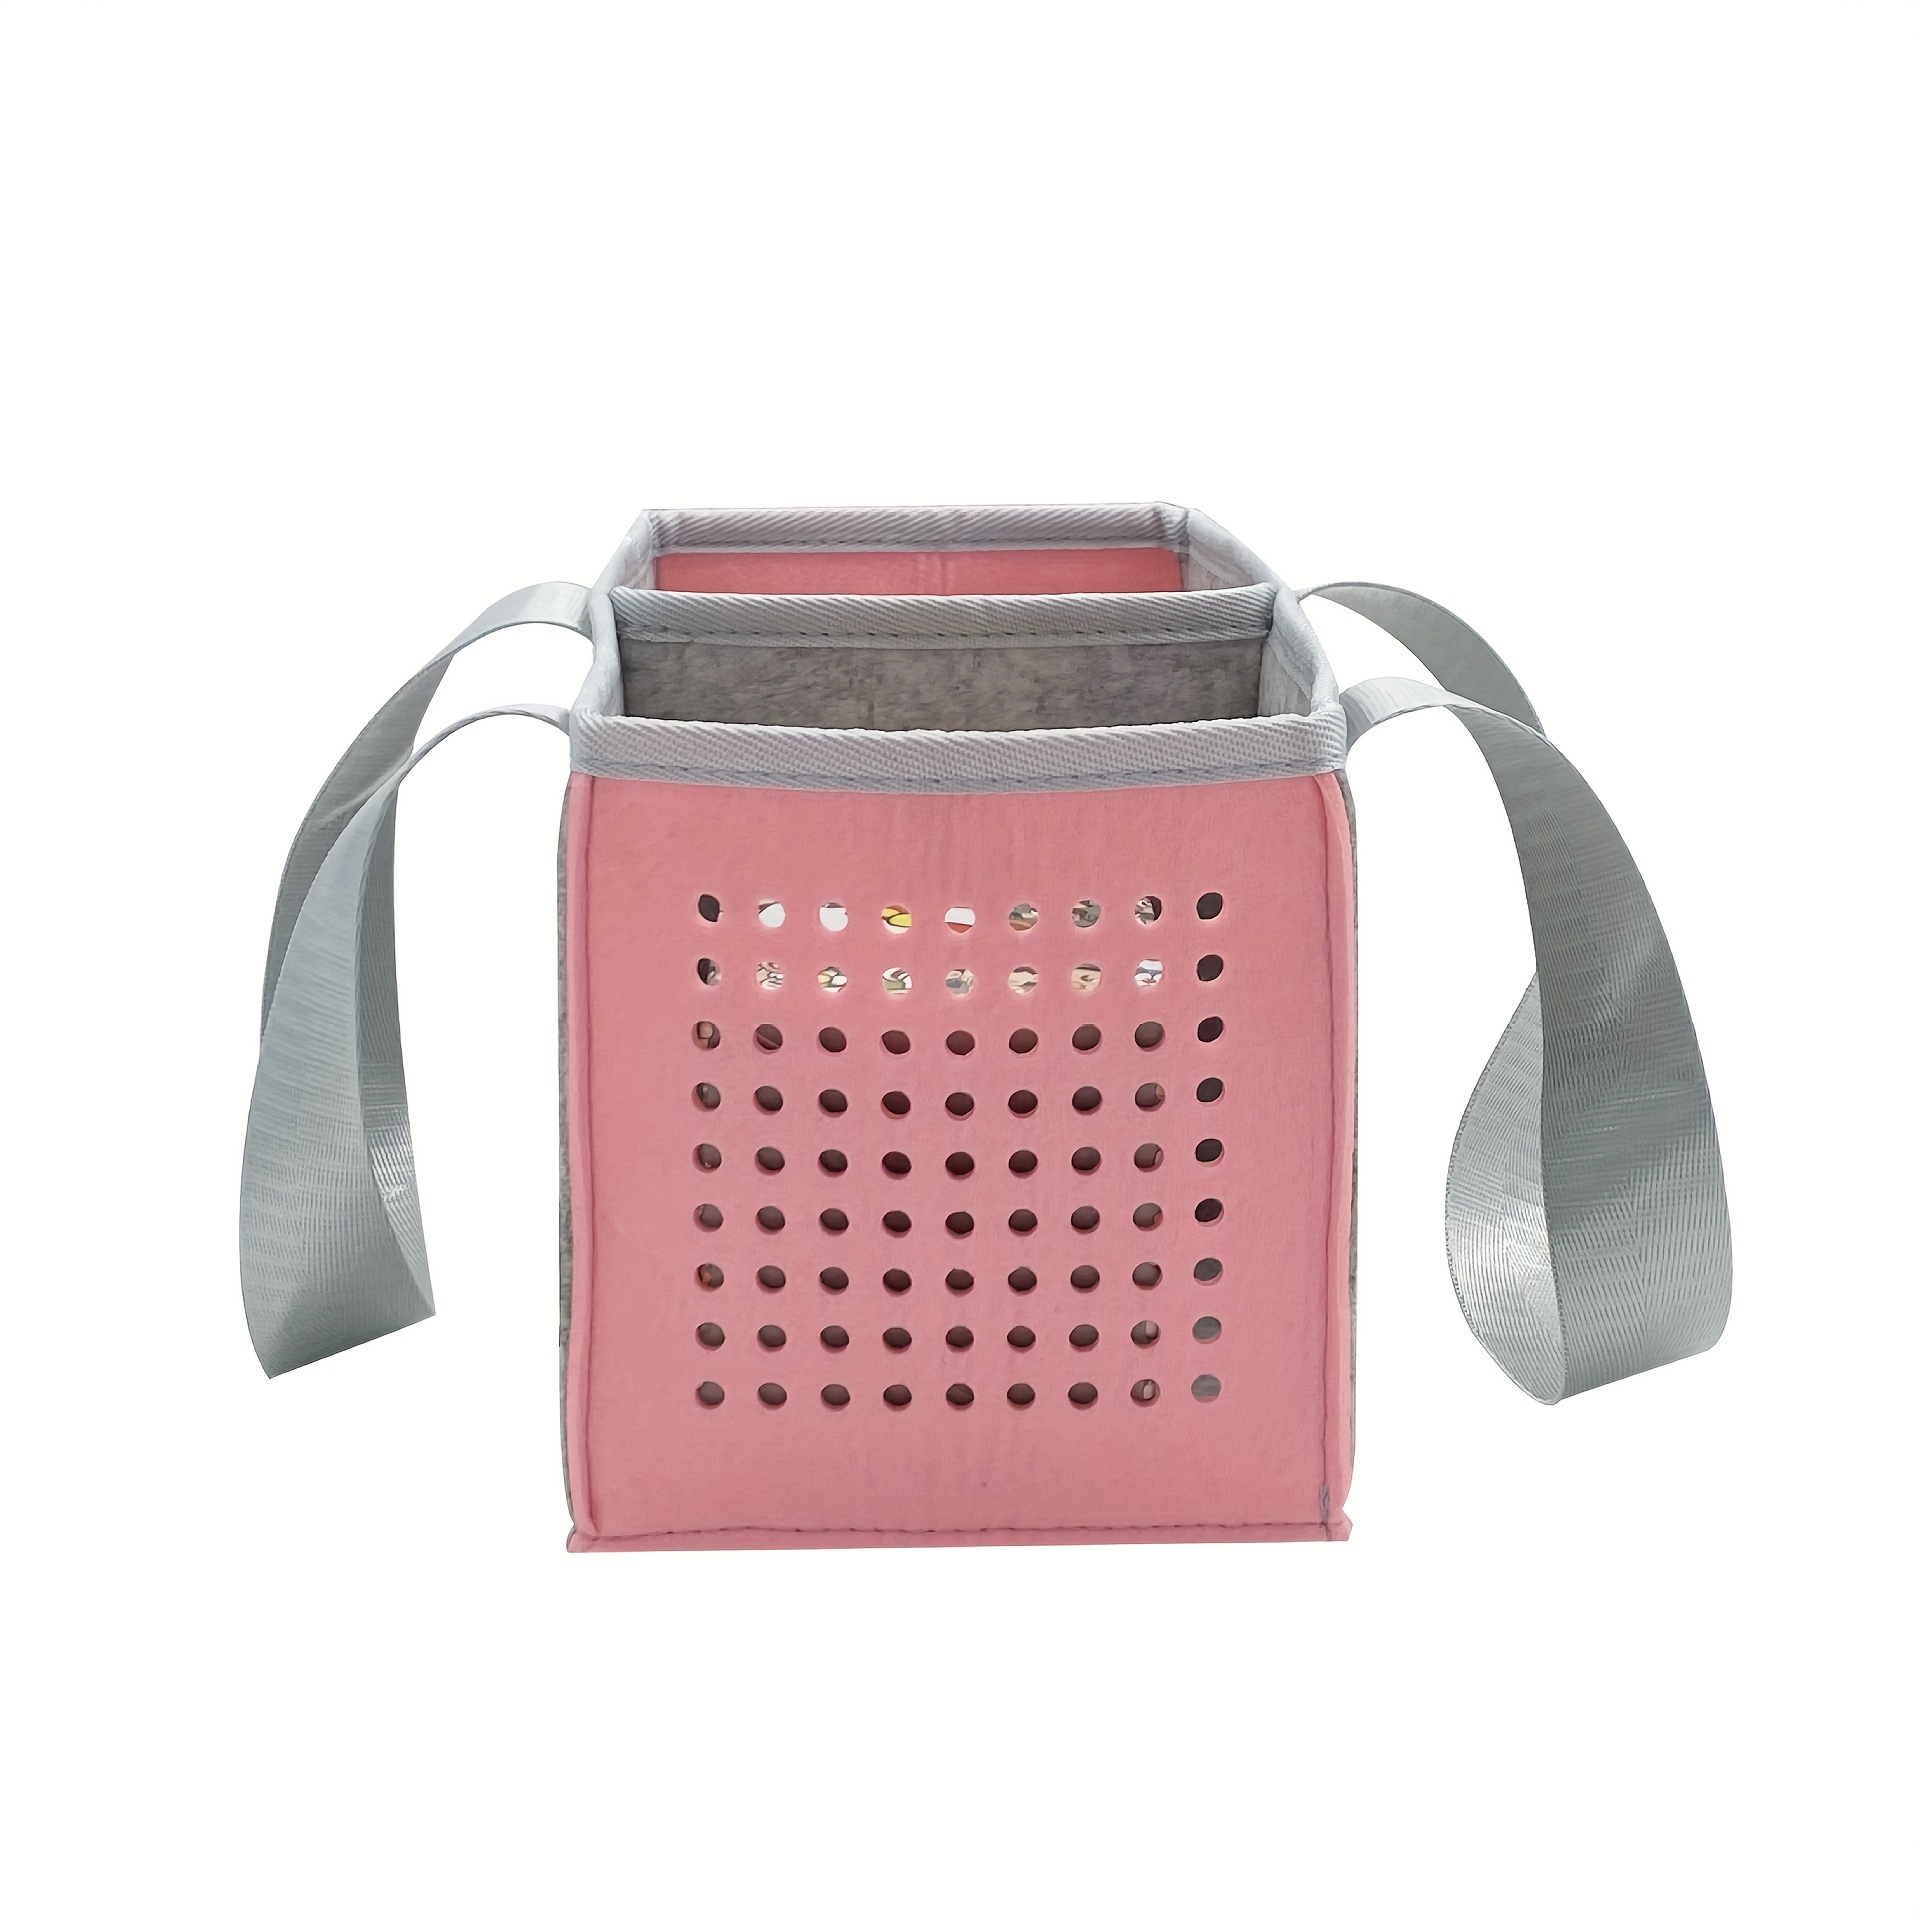 Audio Player Carrying Box Portable Carrying Bag For Toniebox